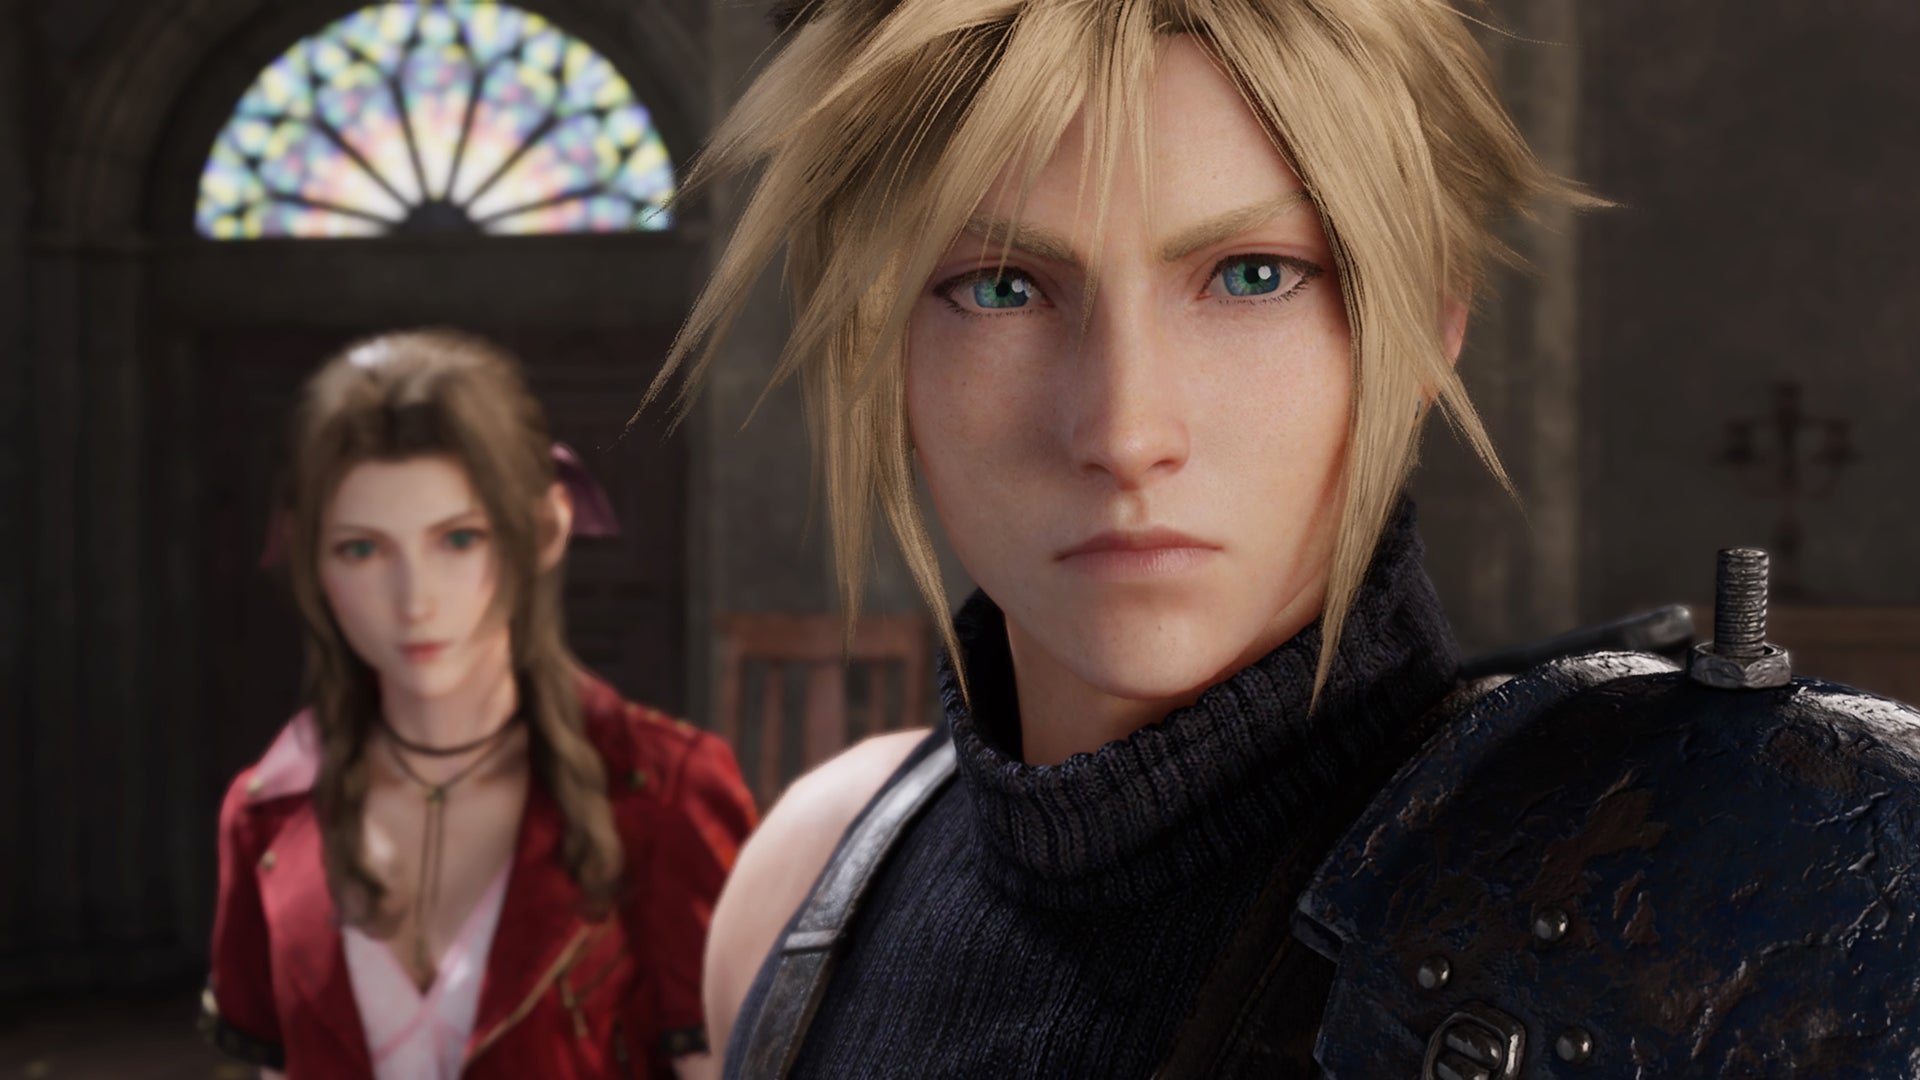 Final Fantasy 7 Remake Length: How Many Chapters Are There? | VG247